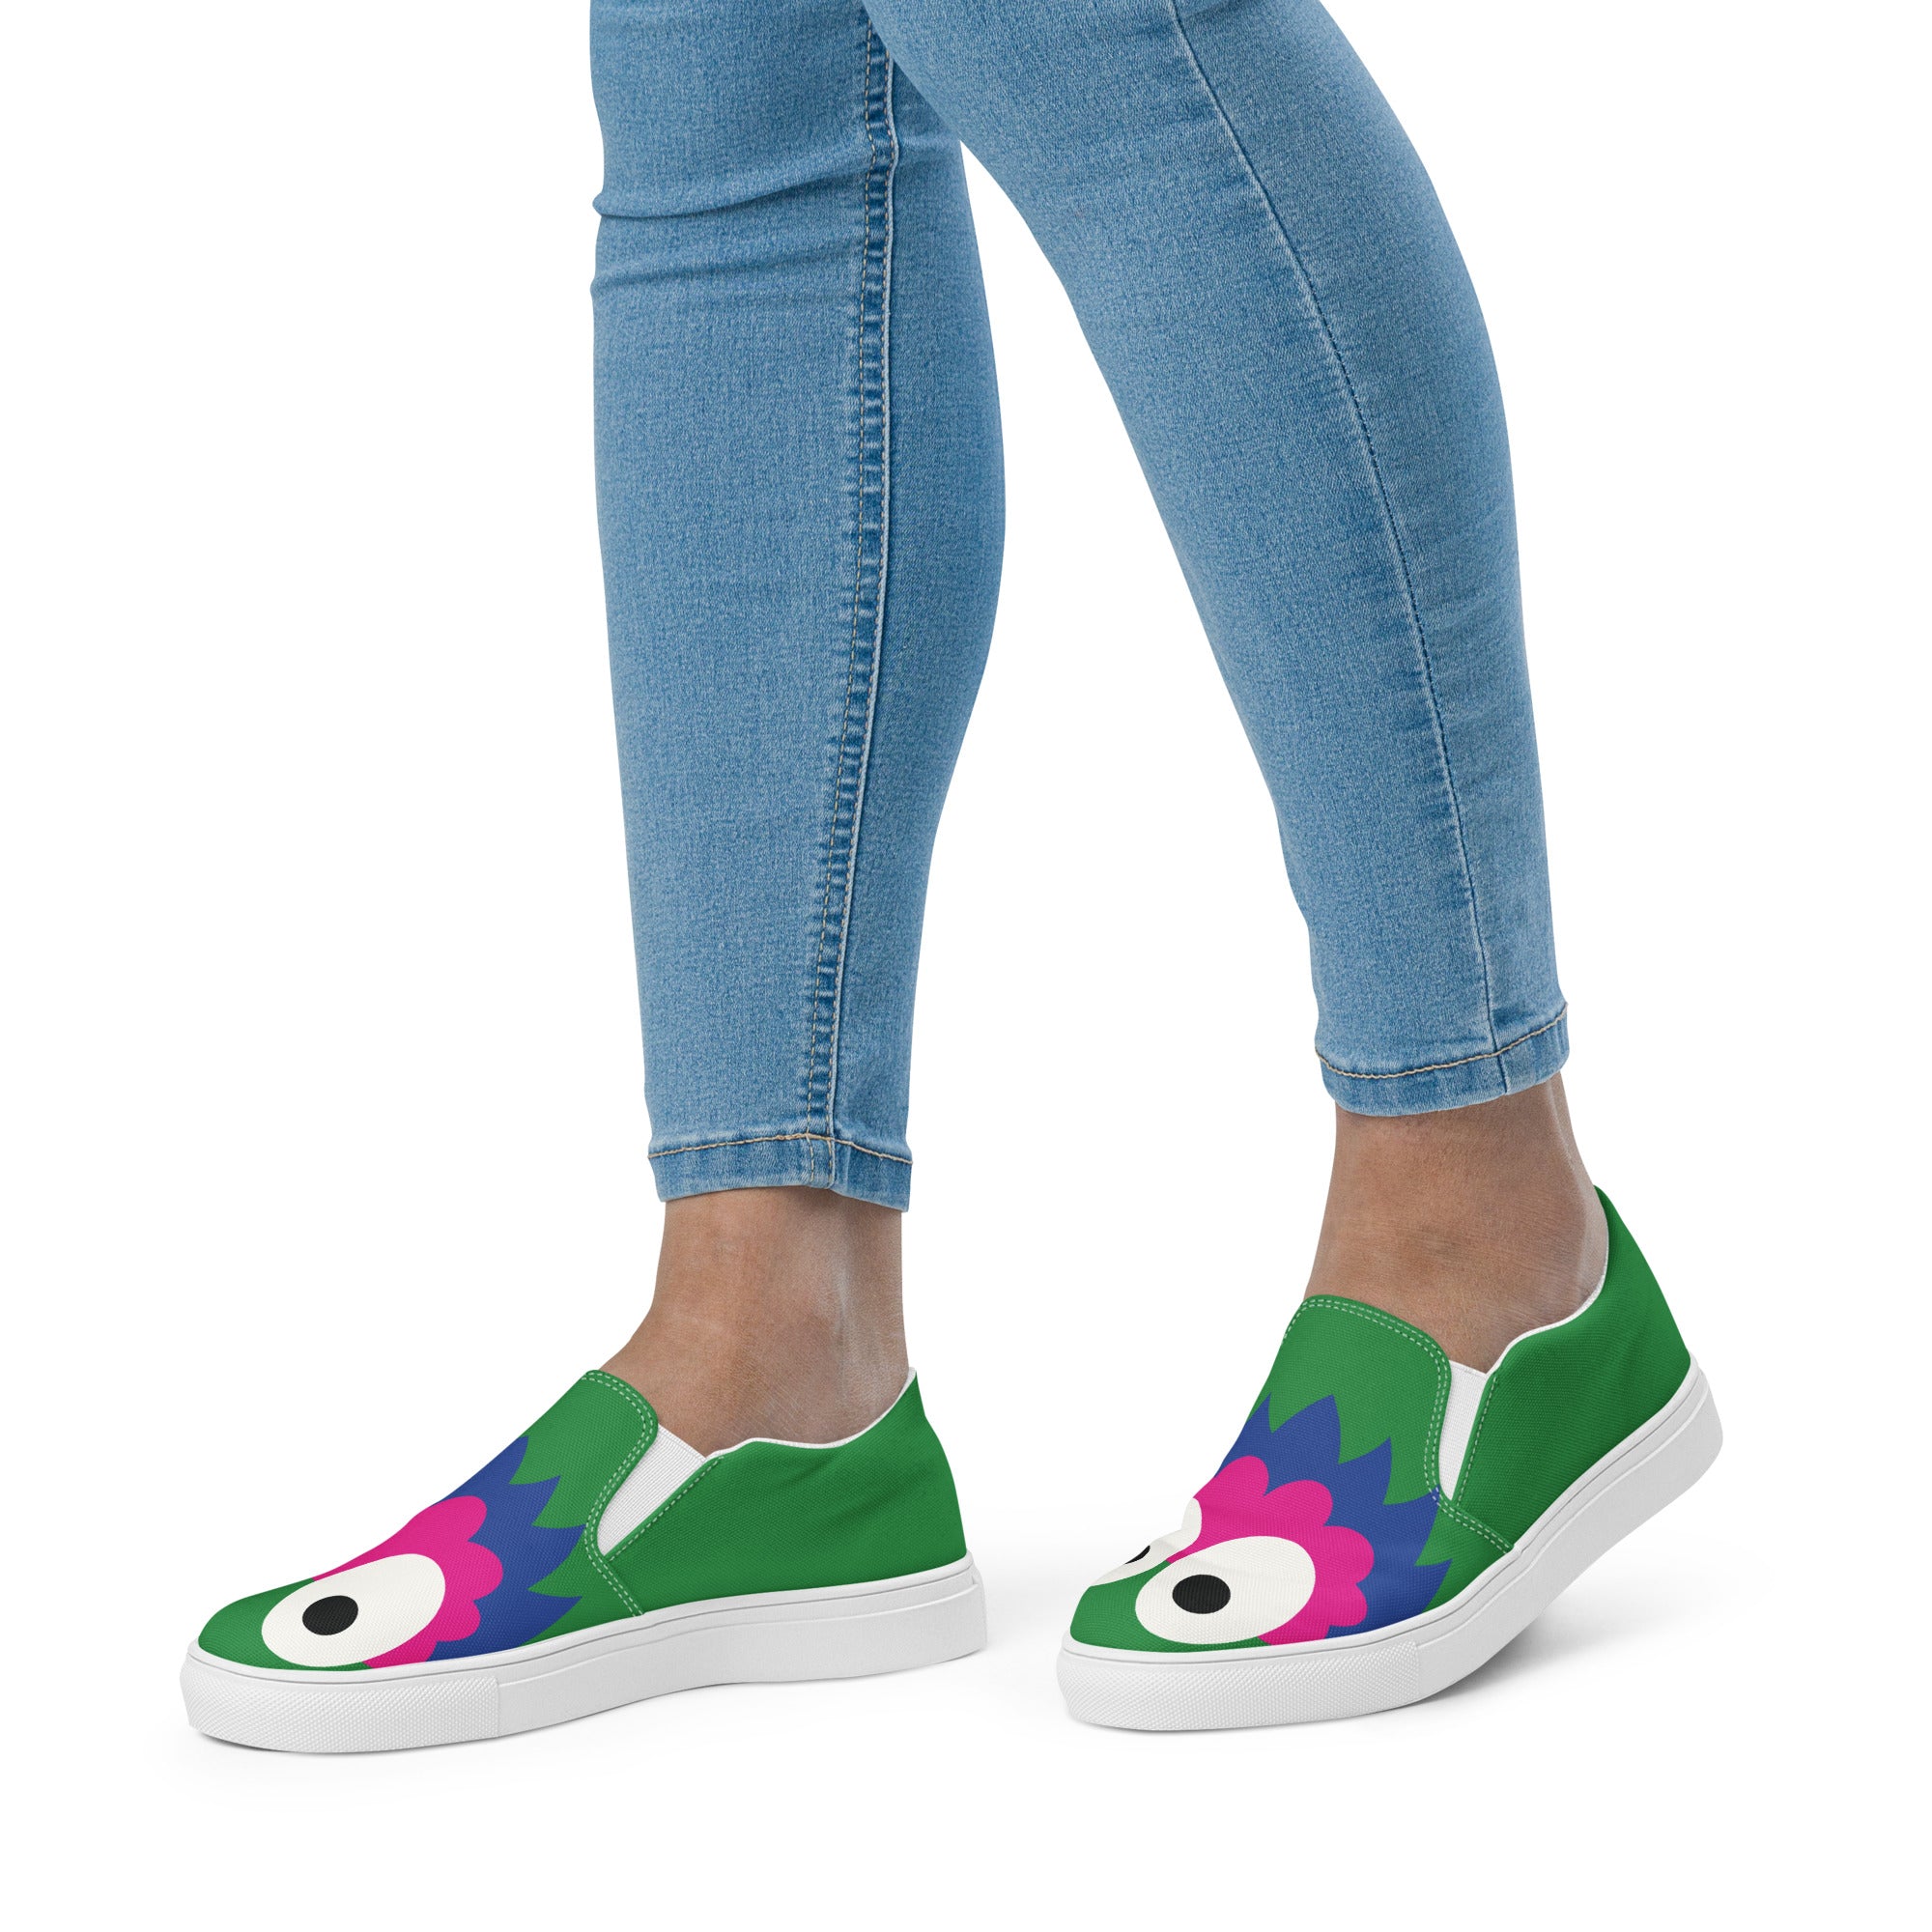 "The PHANS" Women’s Slip-on Canvas Shoes